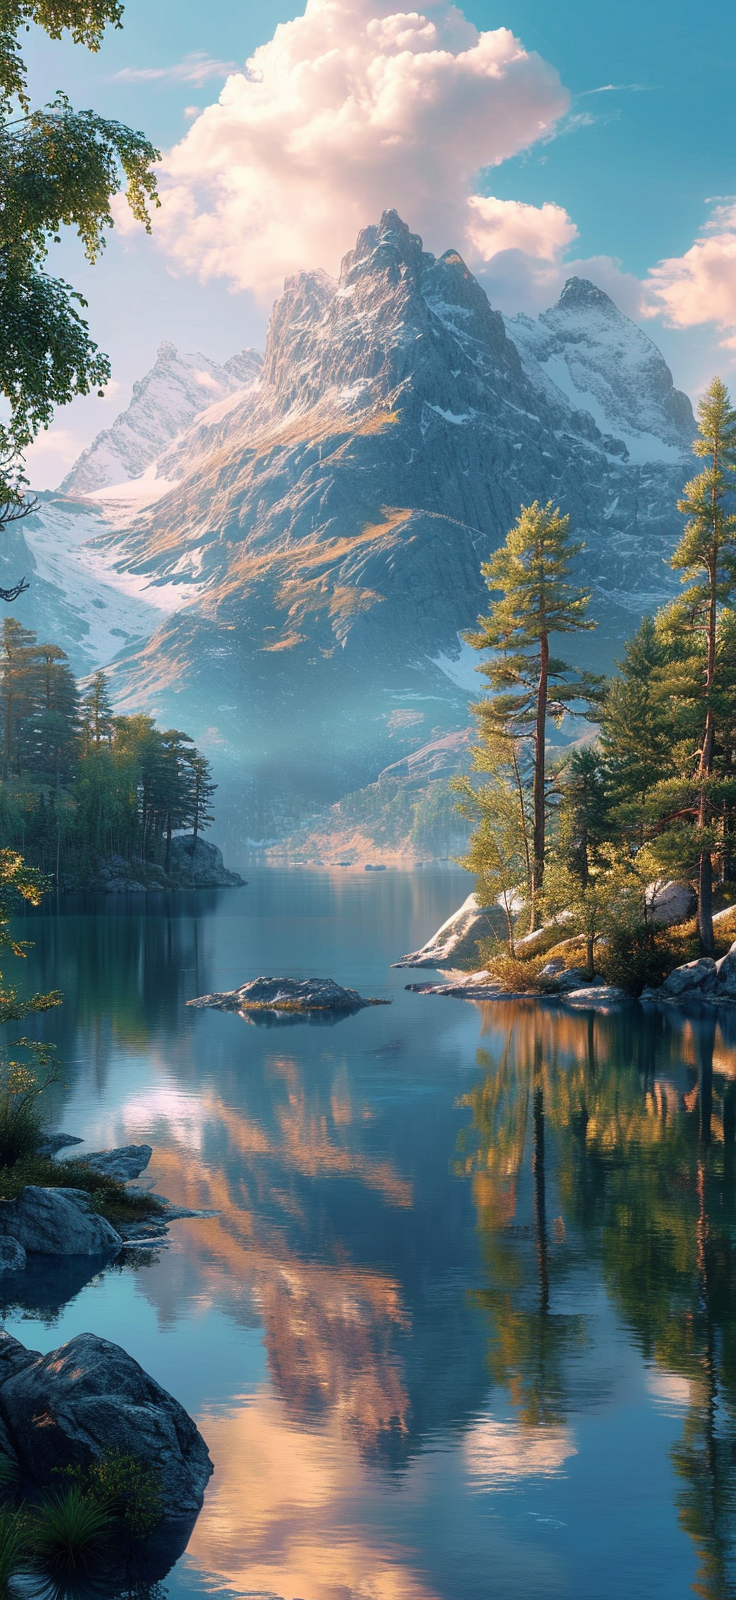 Escape to the tranquility of nature with this stunning mobile wallpaper download. Capture the breathtaking beauty of a serene lake reflecting the grandeur of snow-capped mountain peaks.